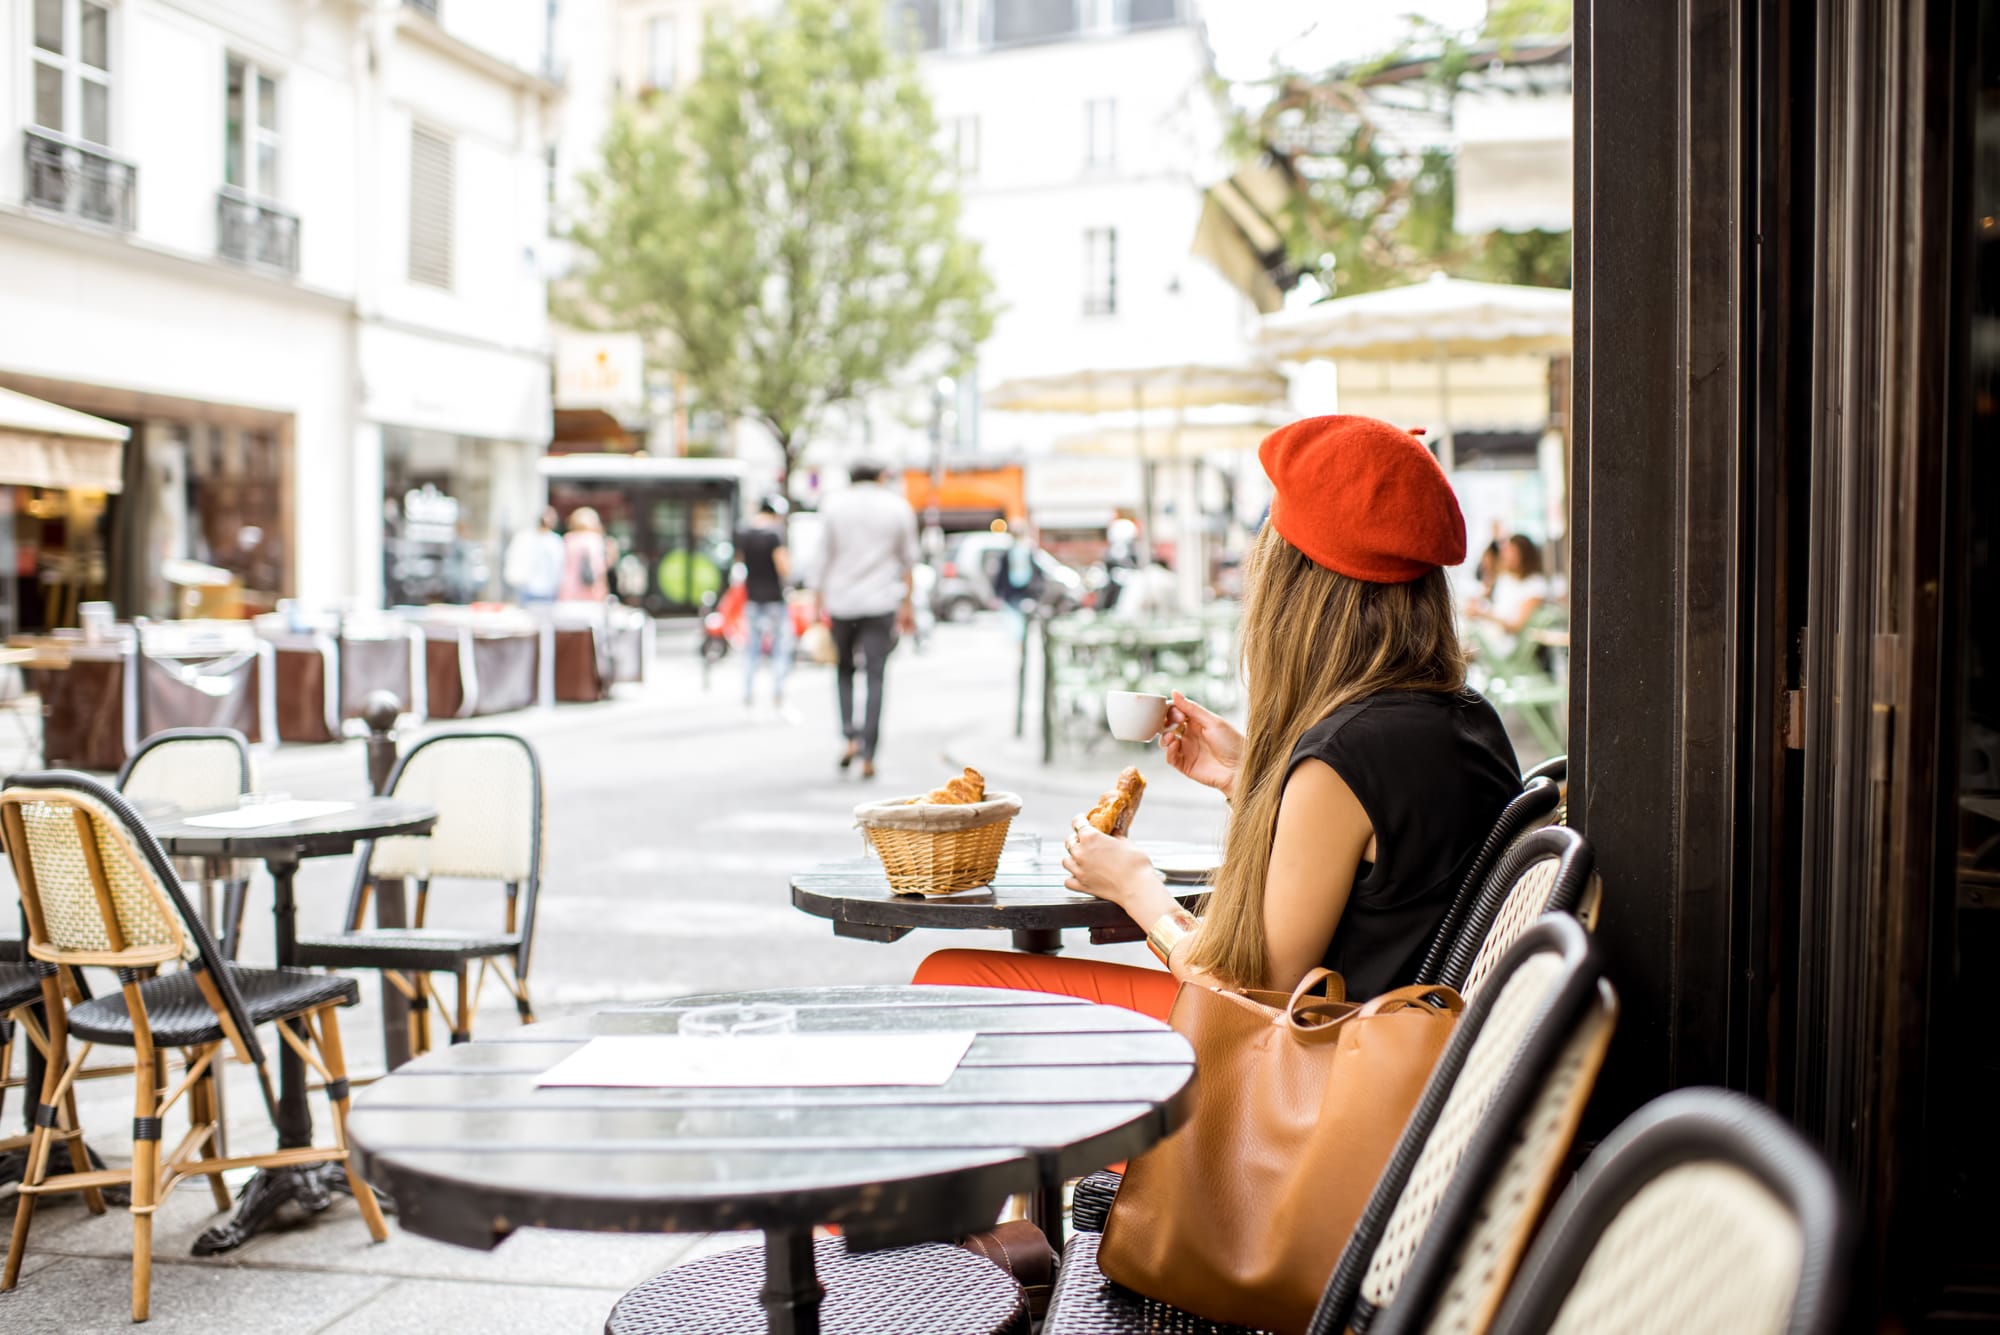 Artist in beret drinking coffee and eating pastries in a coffee shop.